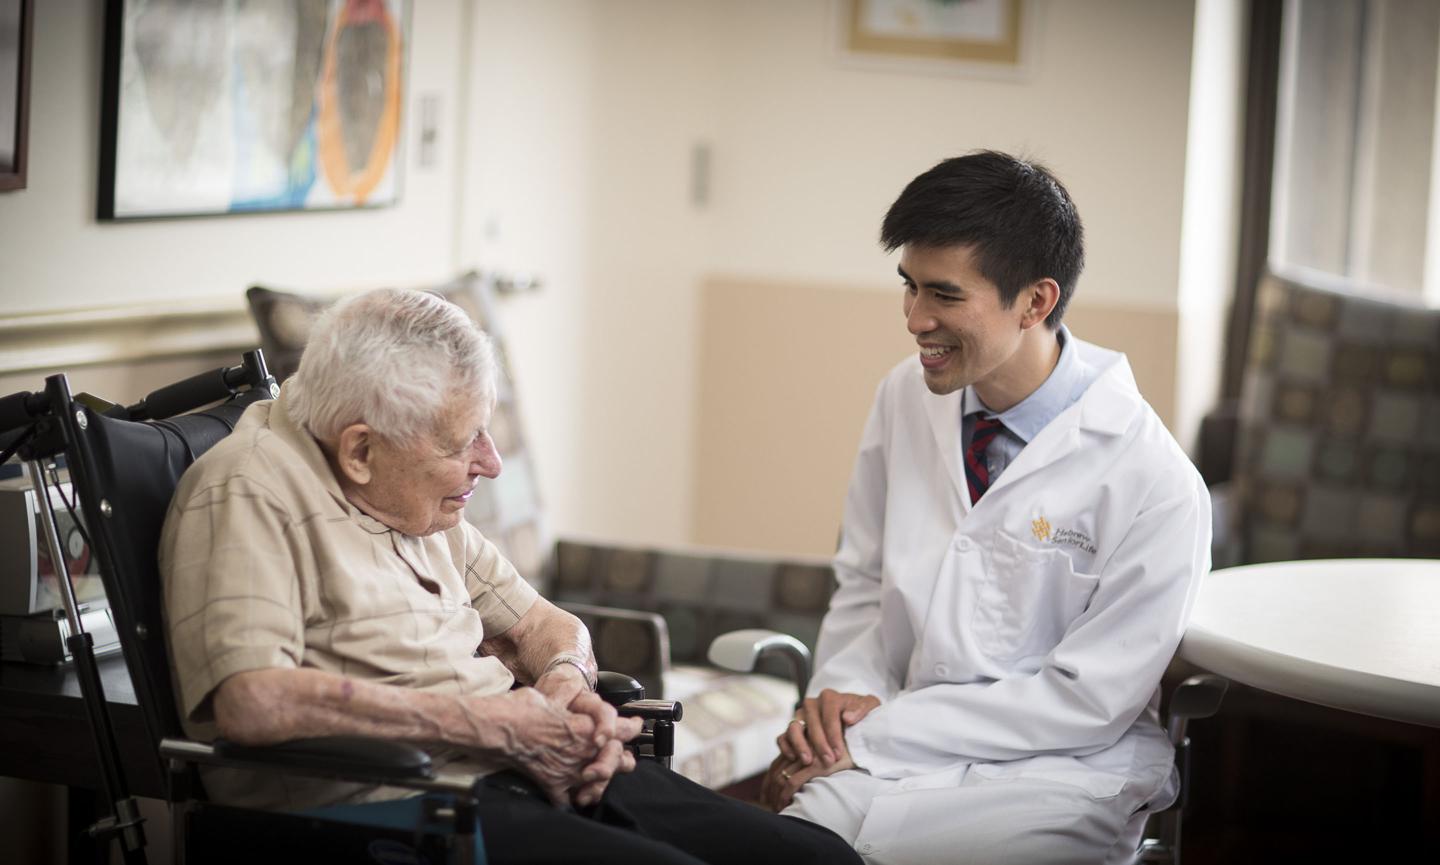 An older man in a wheelchair sits talking with a young Harvard Medical School doctor at Hebrew SeniorLife. The doctor is smiling and wearing a white coat.